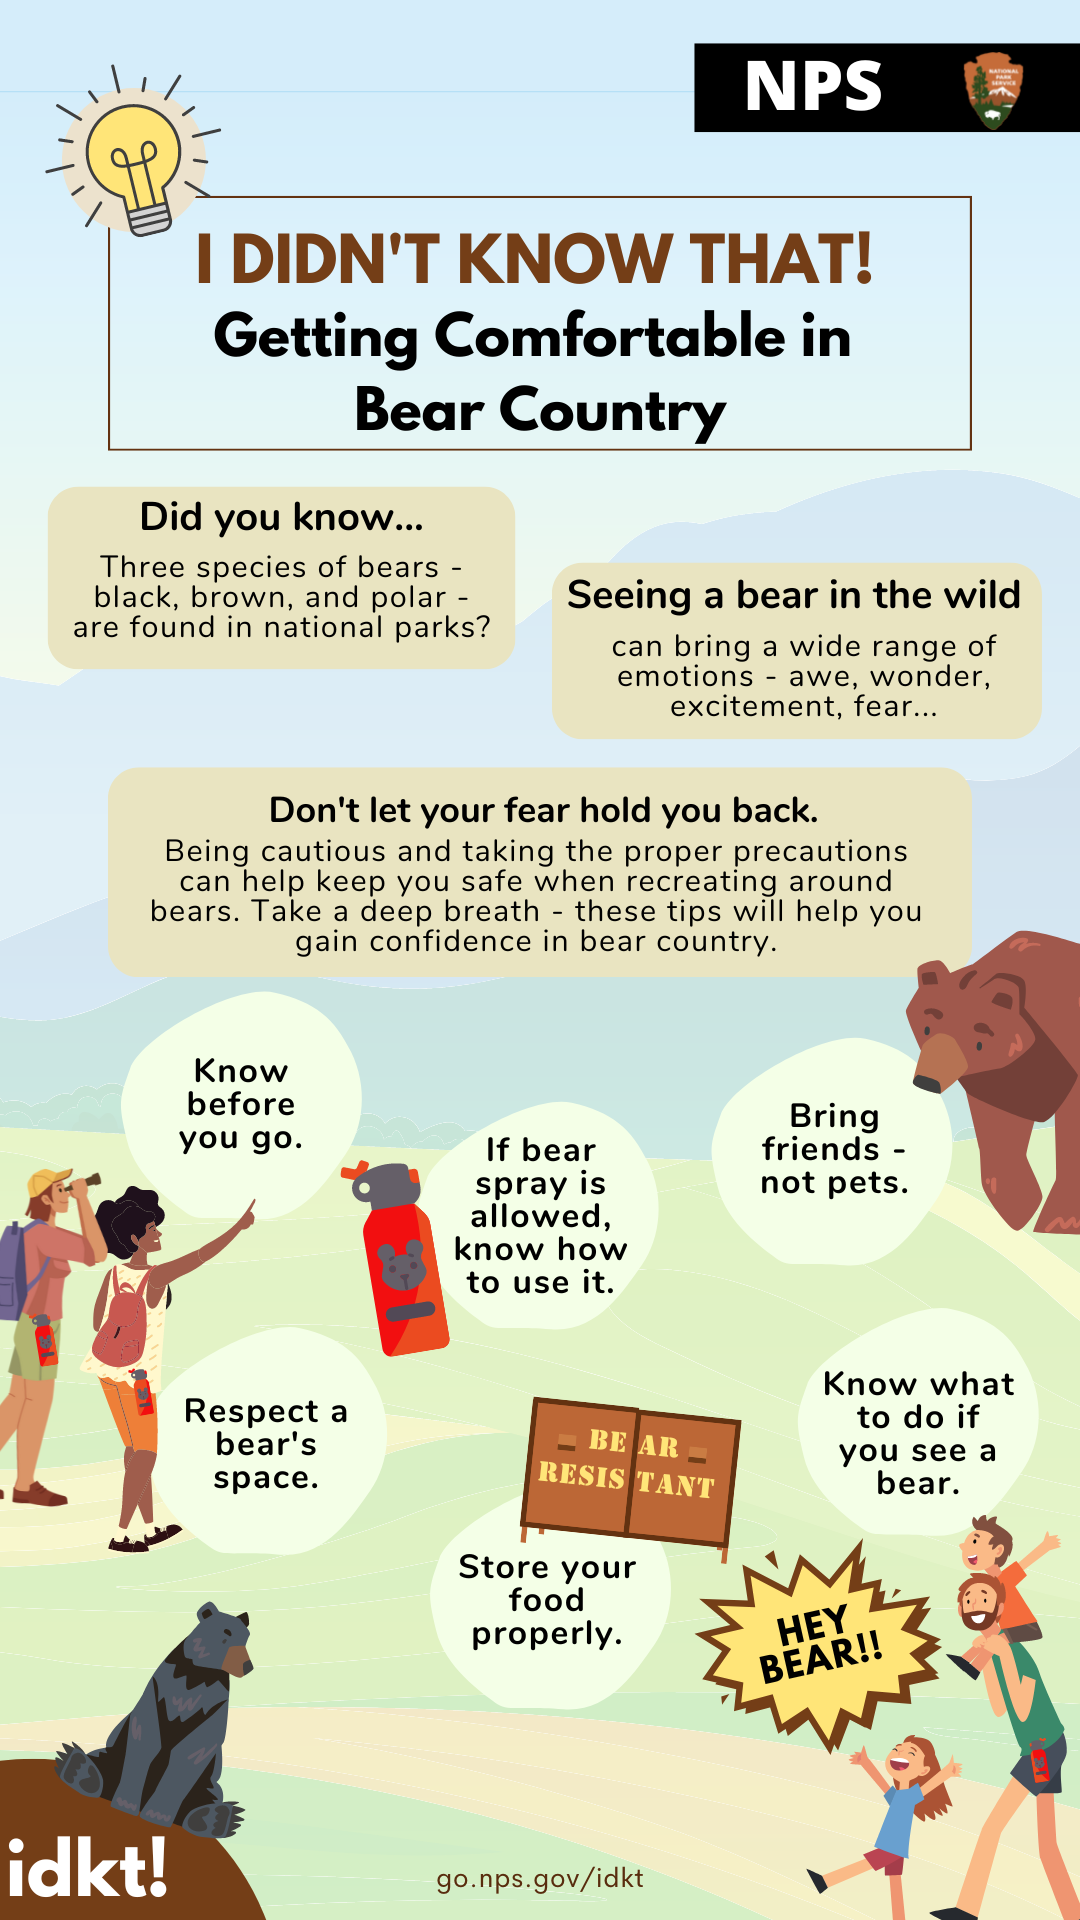 an infographic with information on how to get comfortable in bear country. Full alt text available below the image